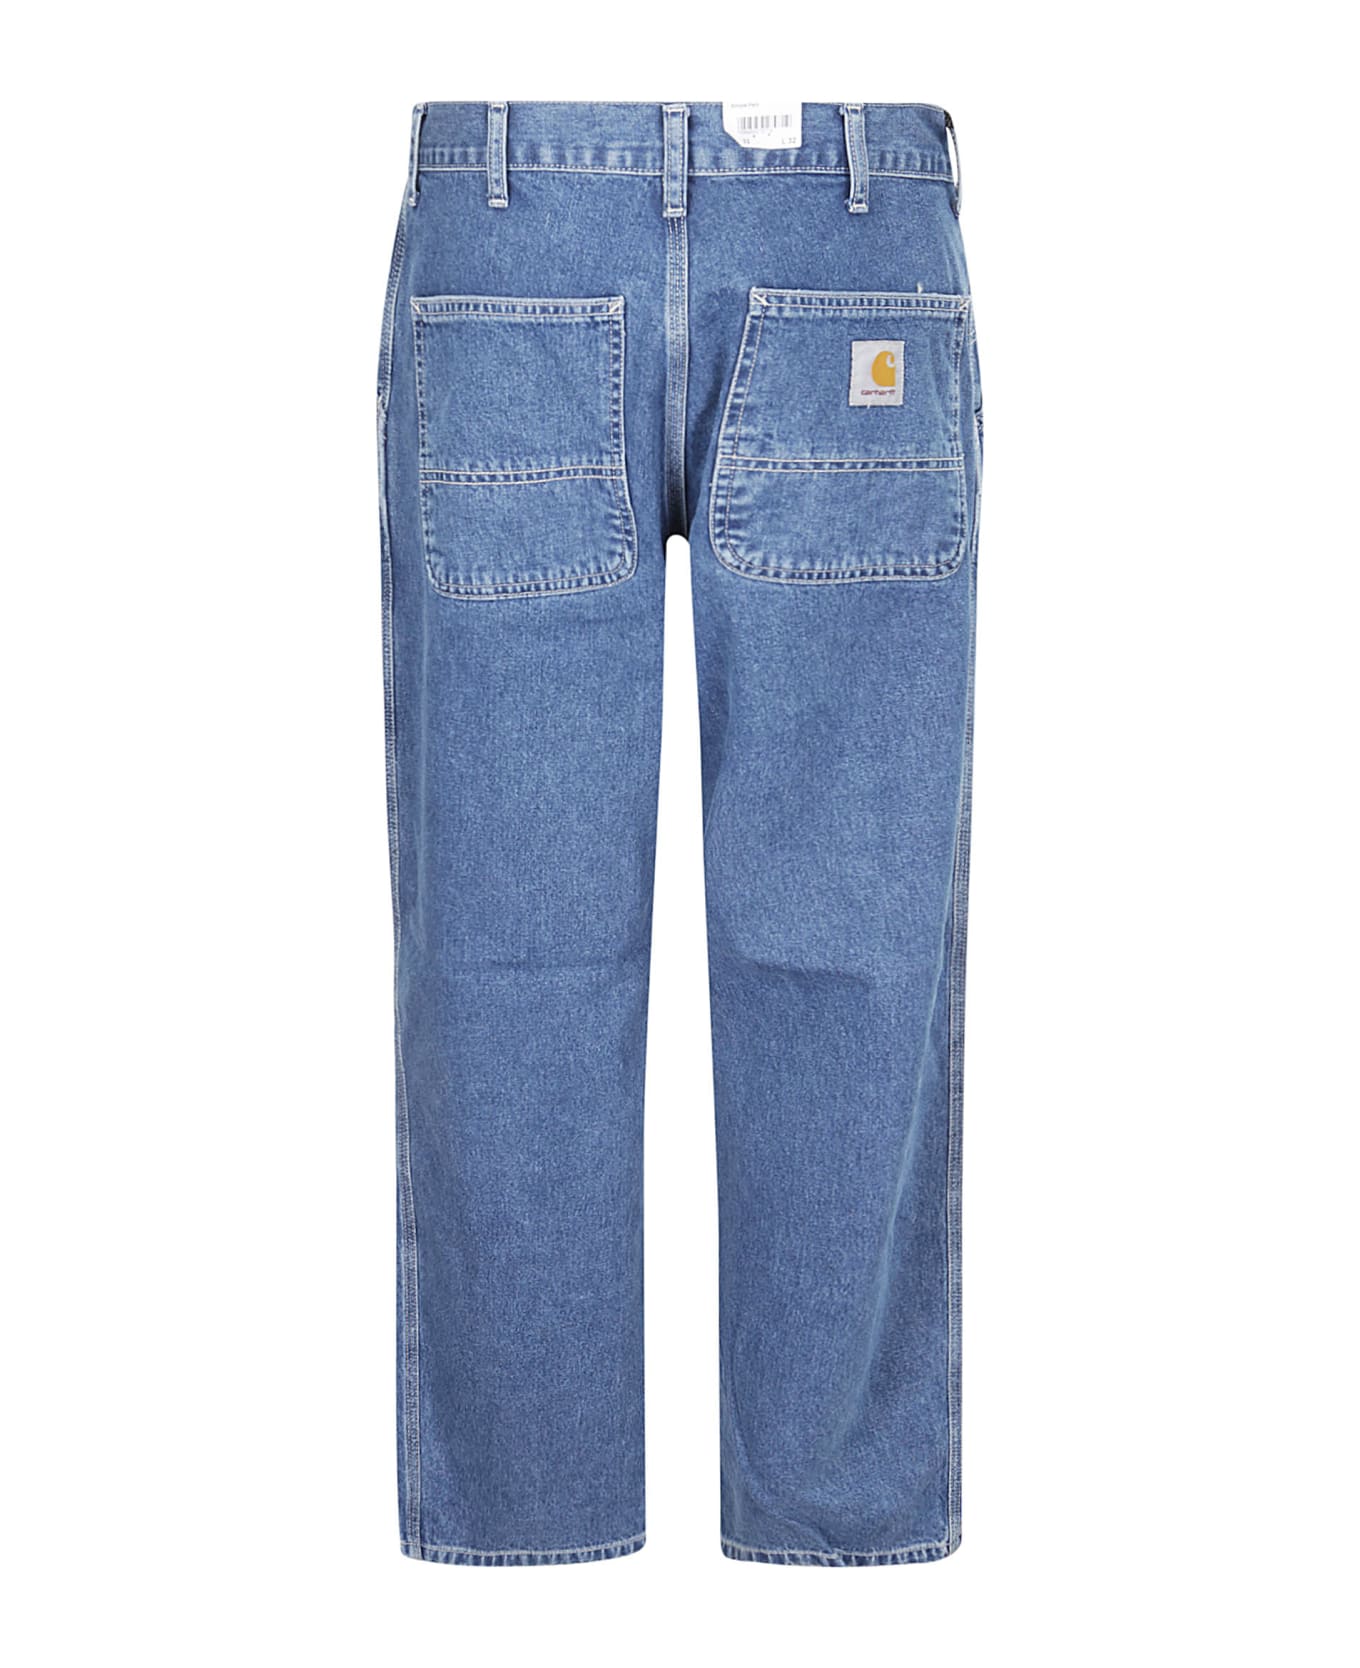 Carhartt Simple Pant - BLUE STONE WASHED